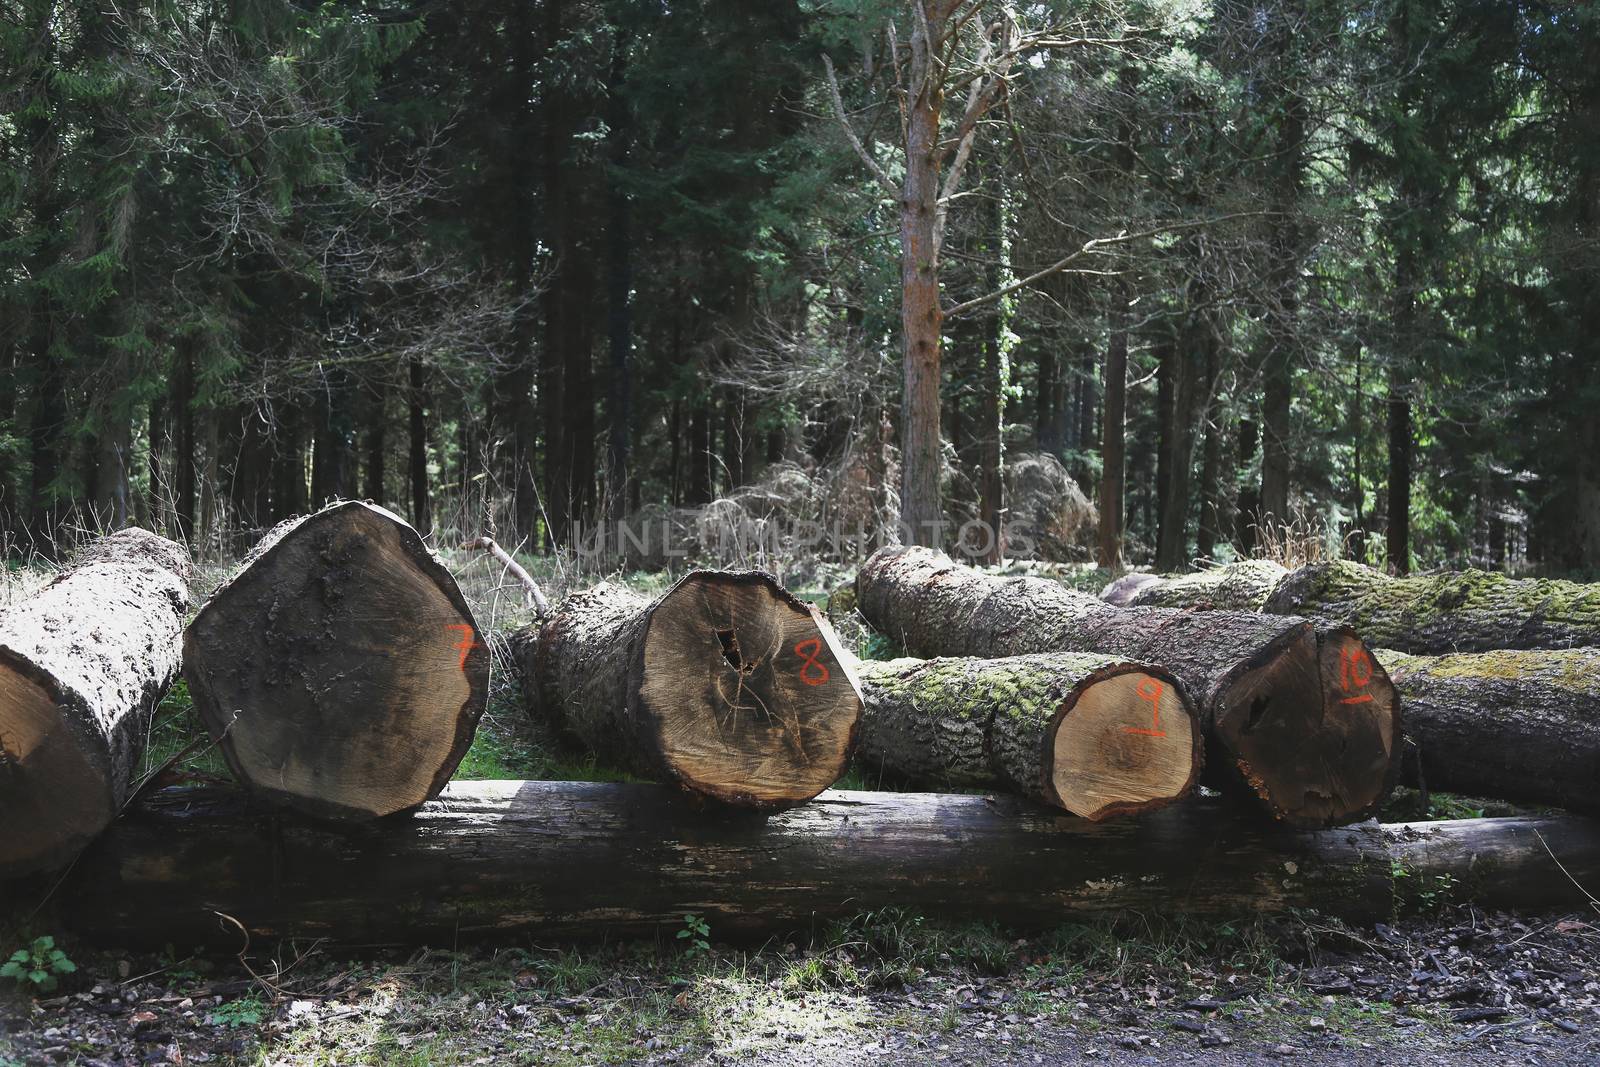 A collection of felled logs with identification numbers